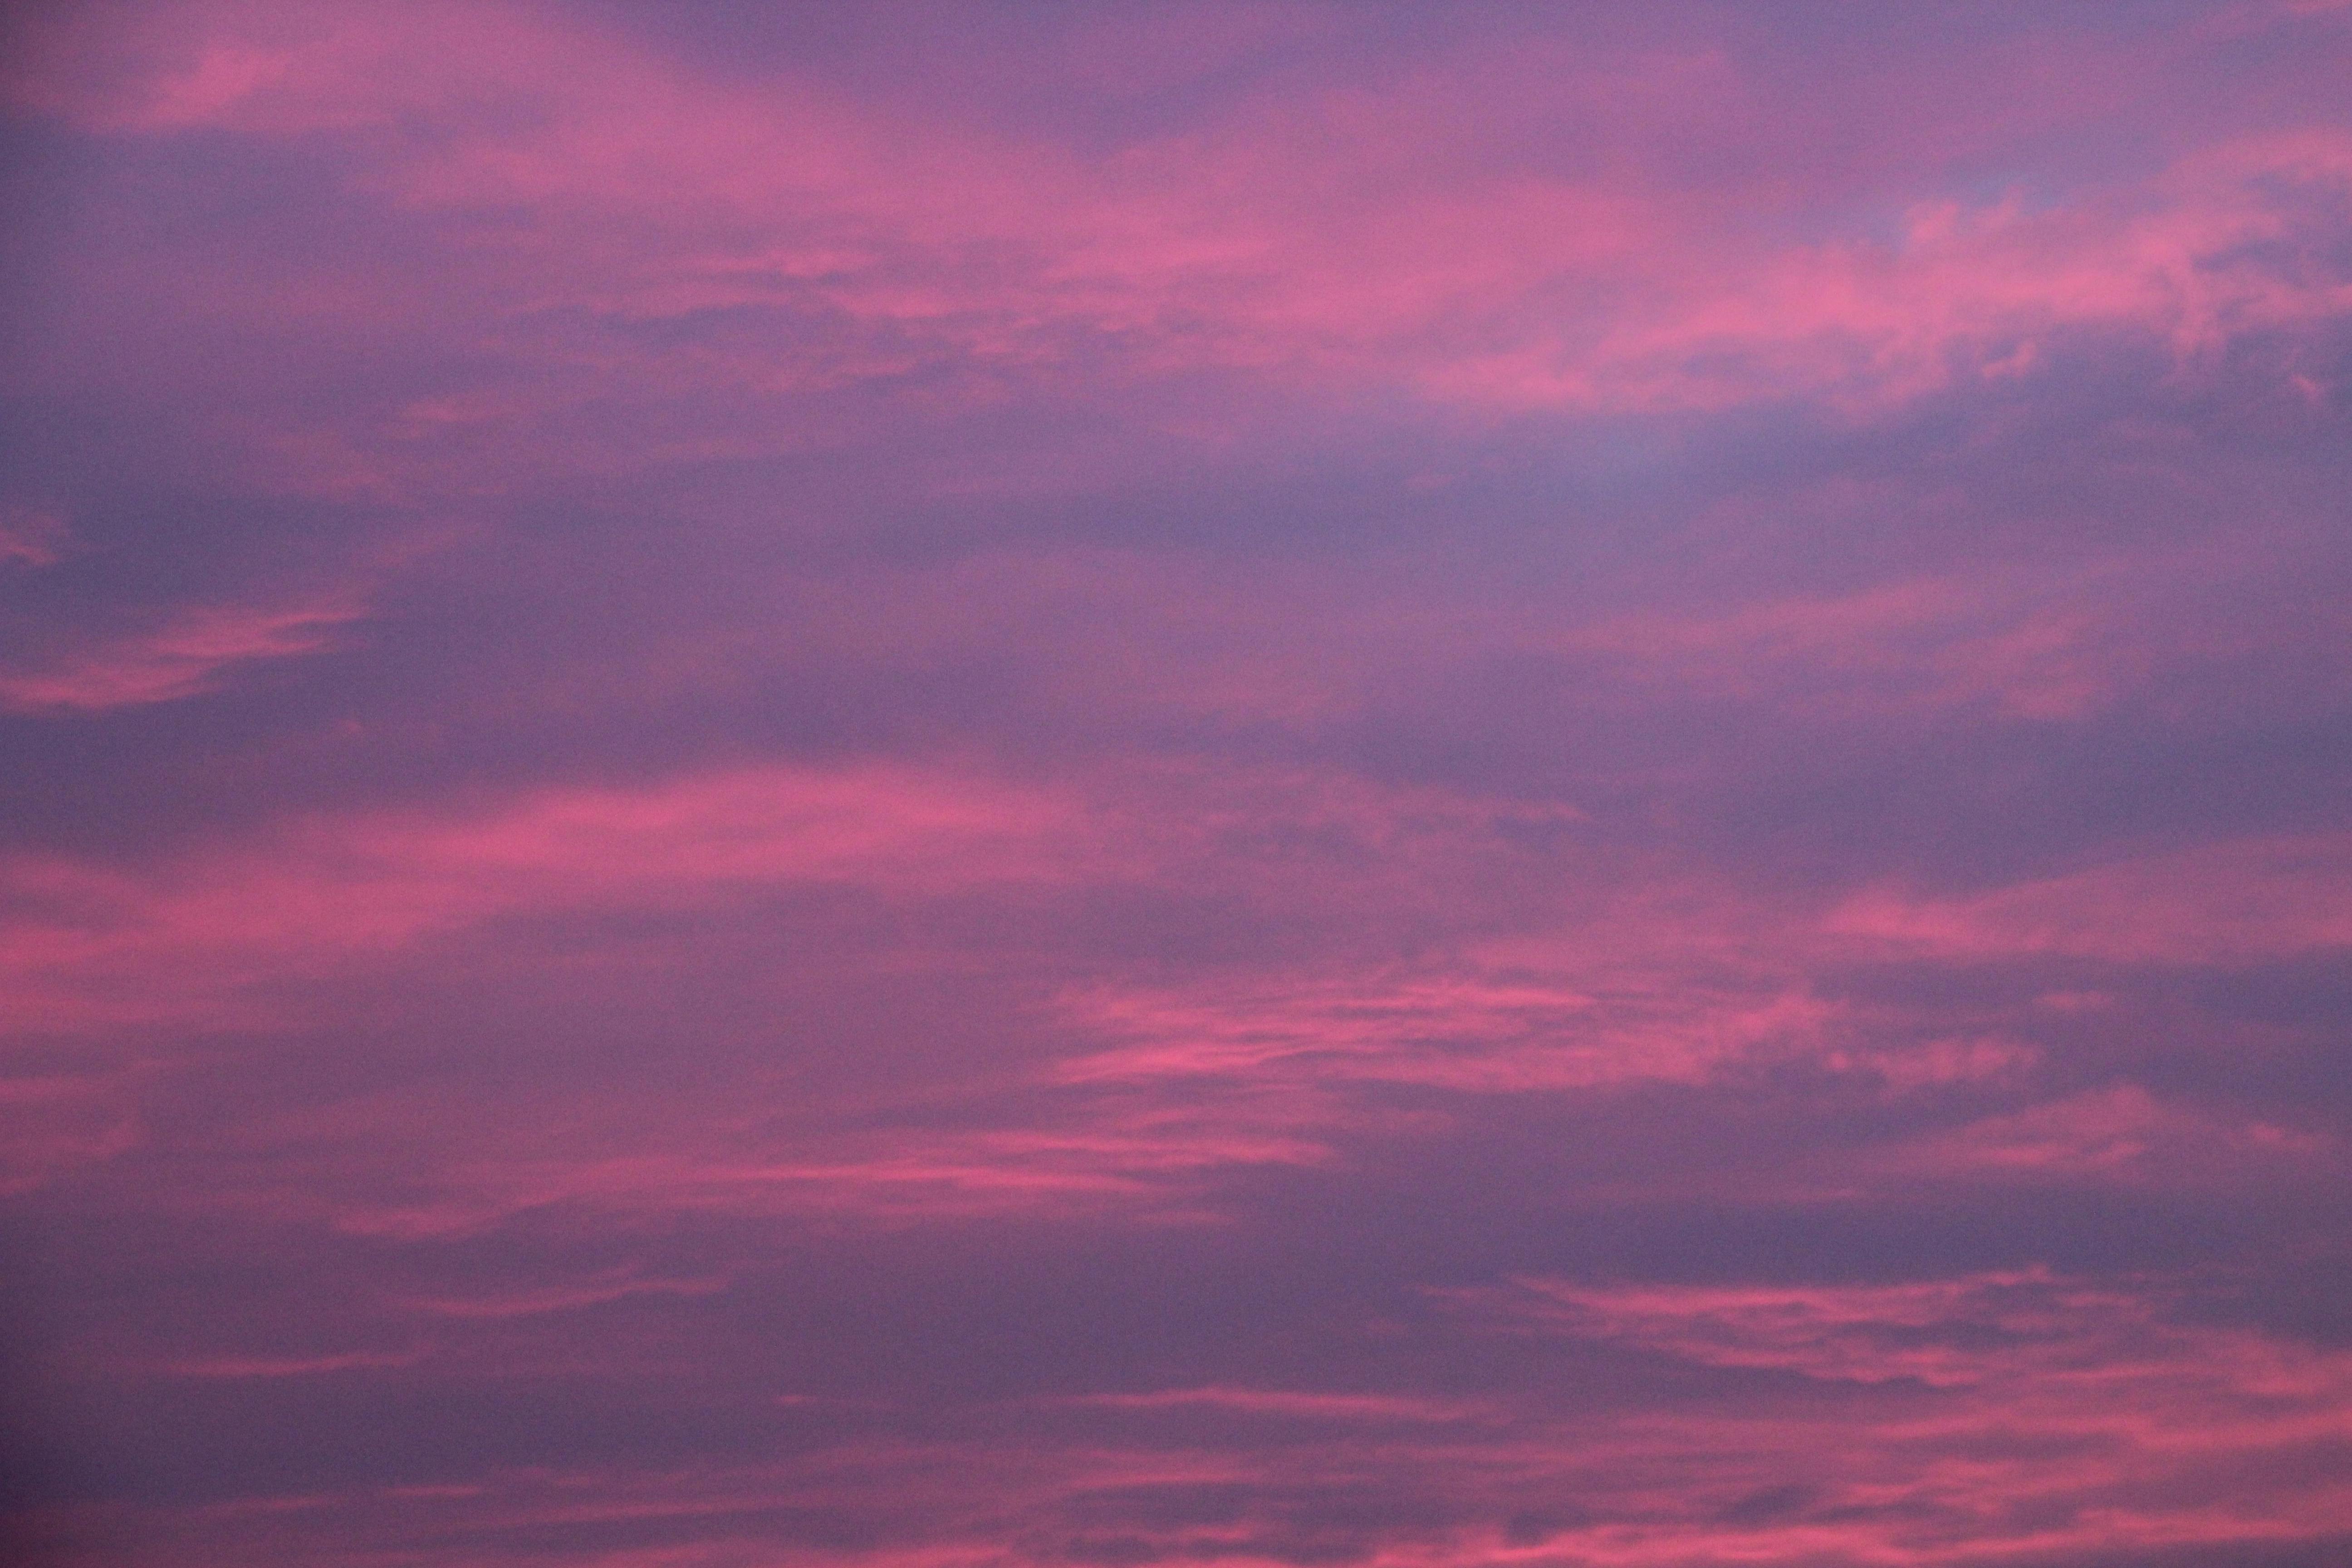 Free stock photo of red sky